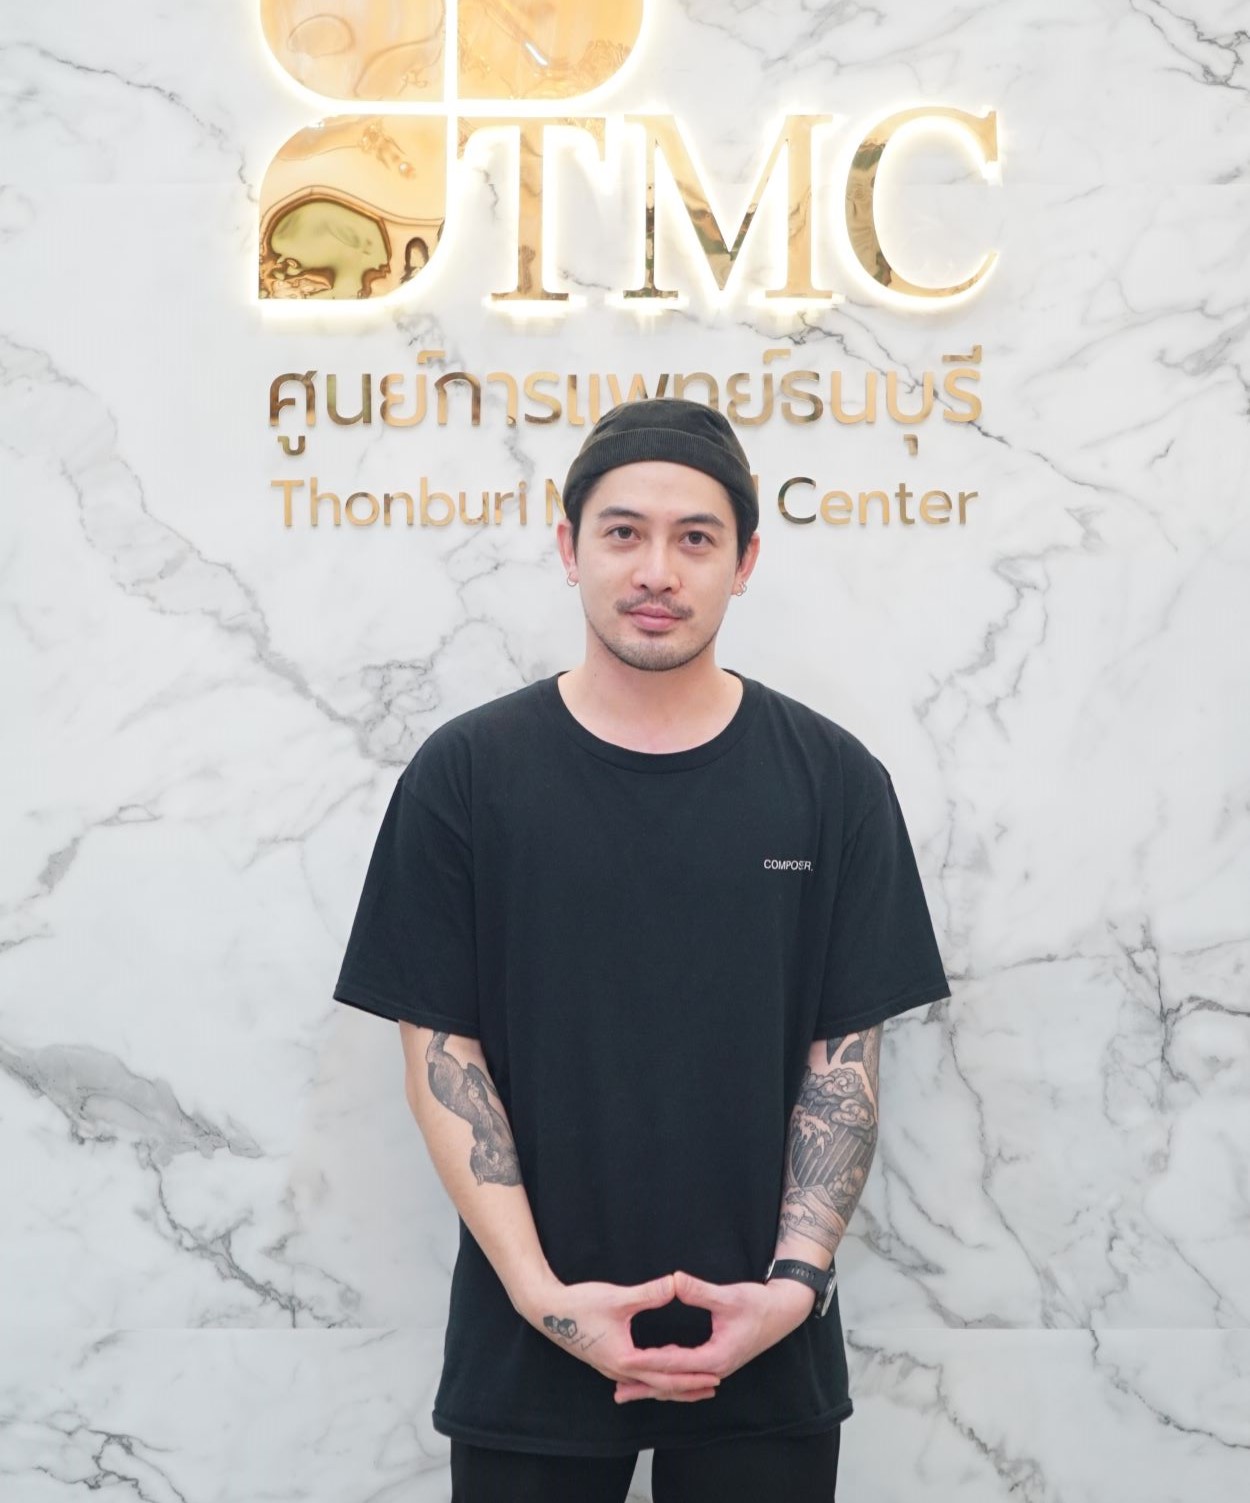 The review of face treatment and face-lifting by Khun Max Jenmana